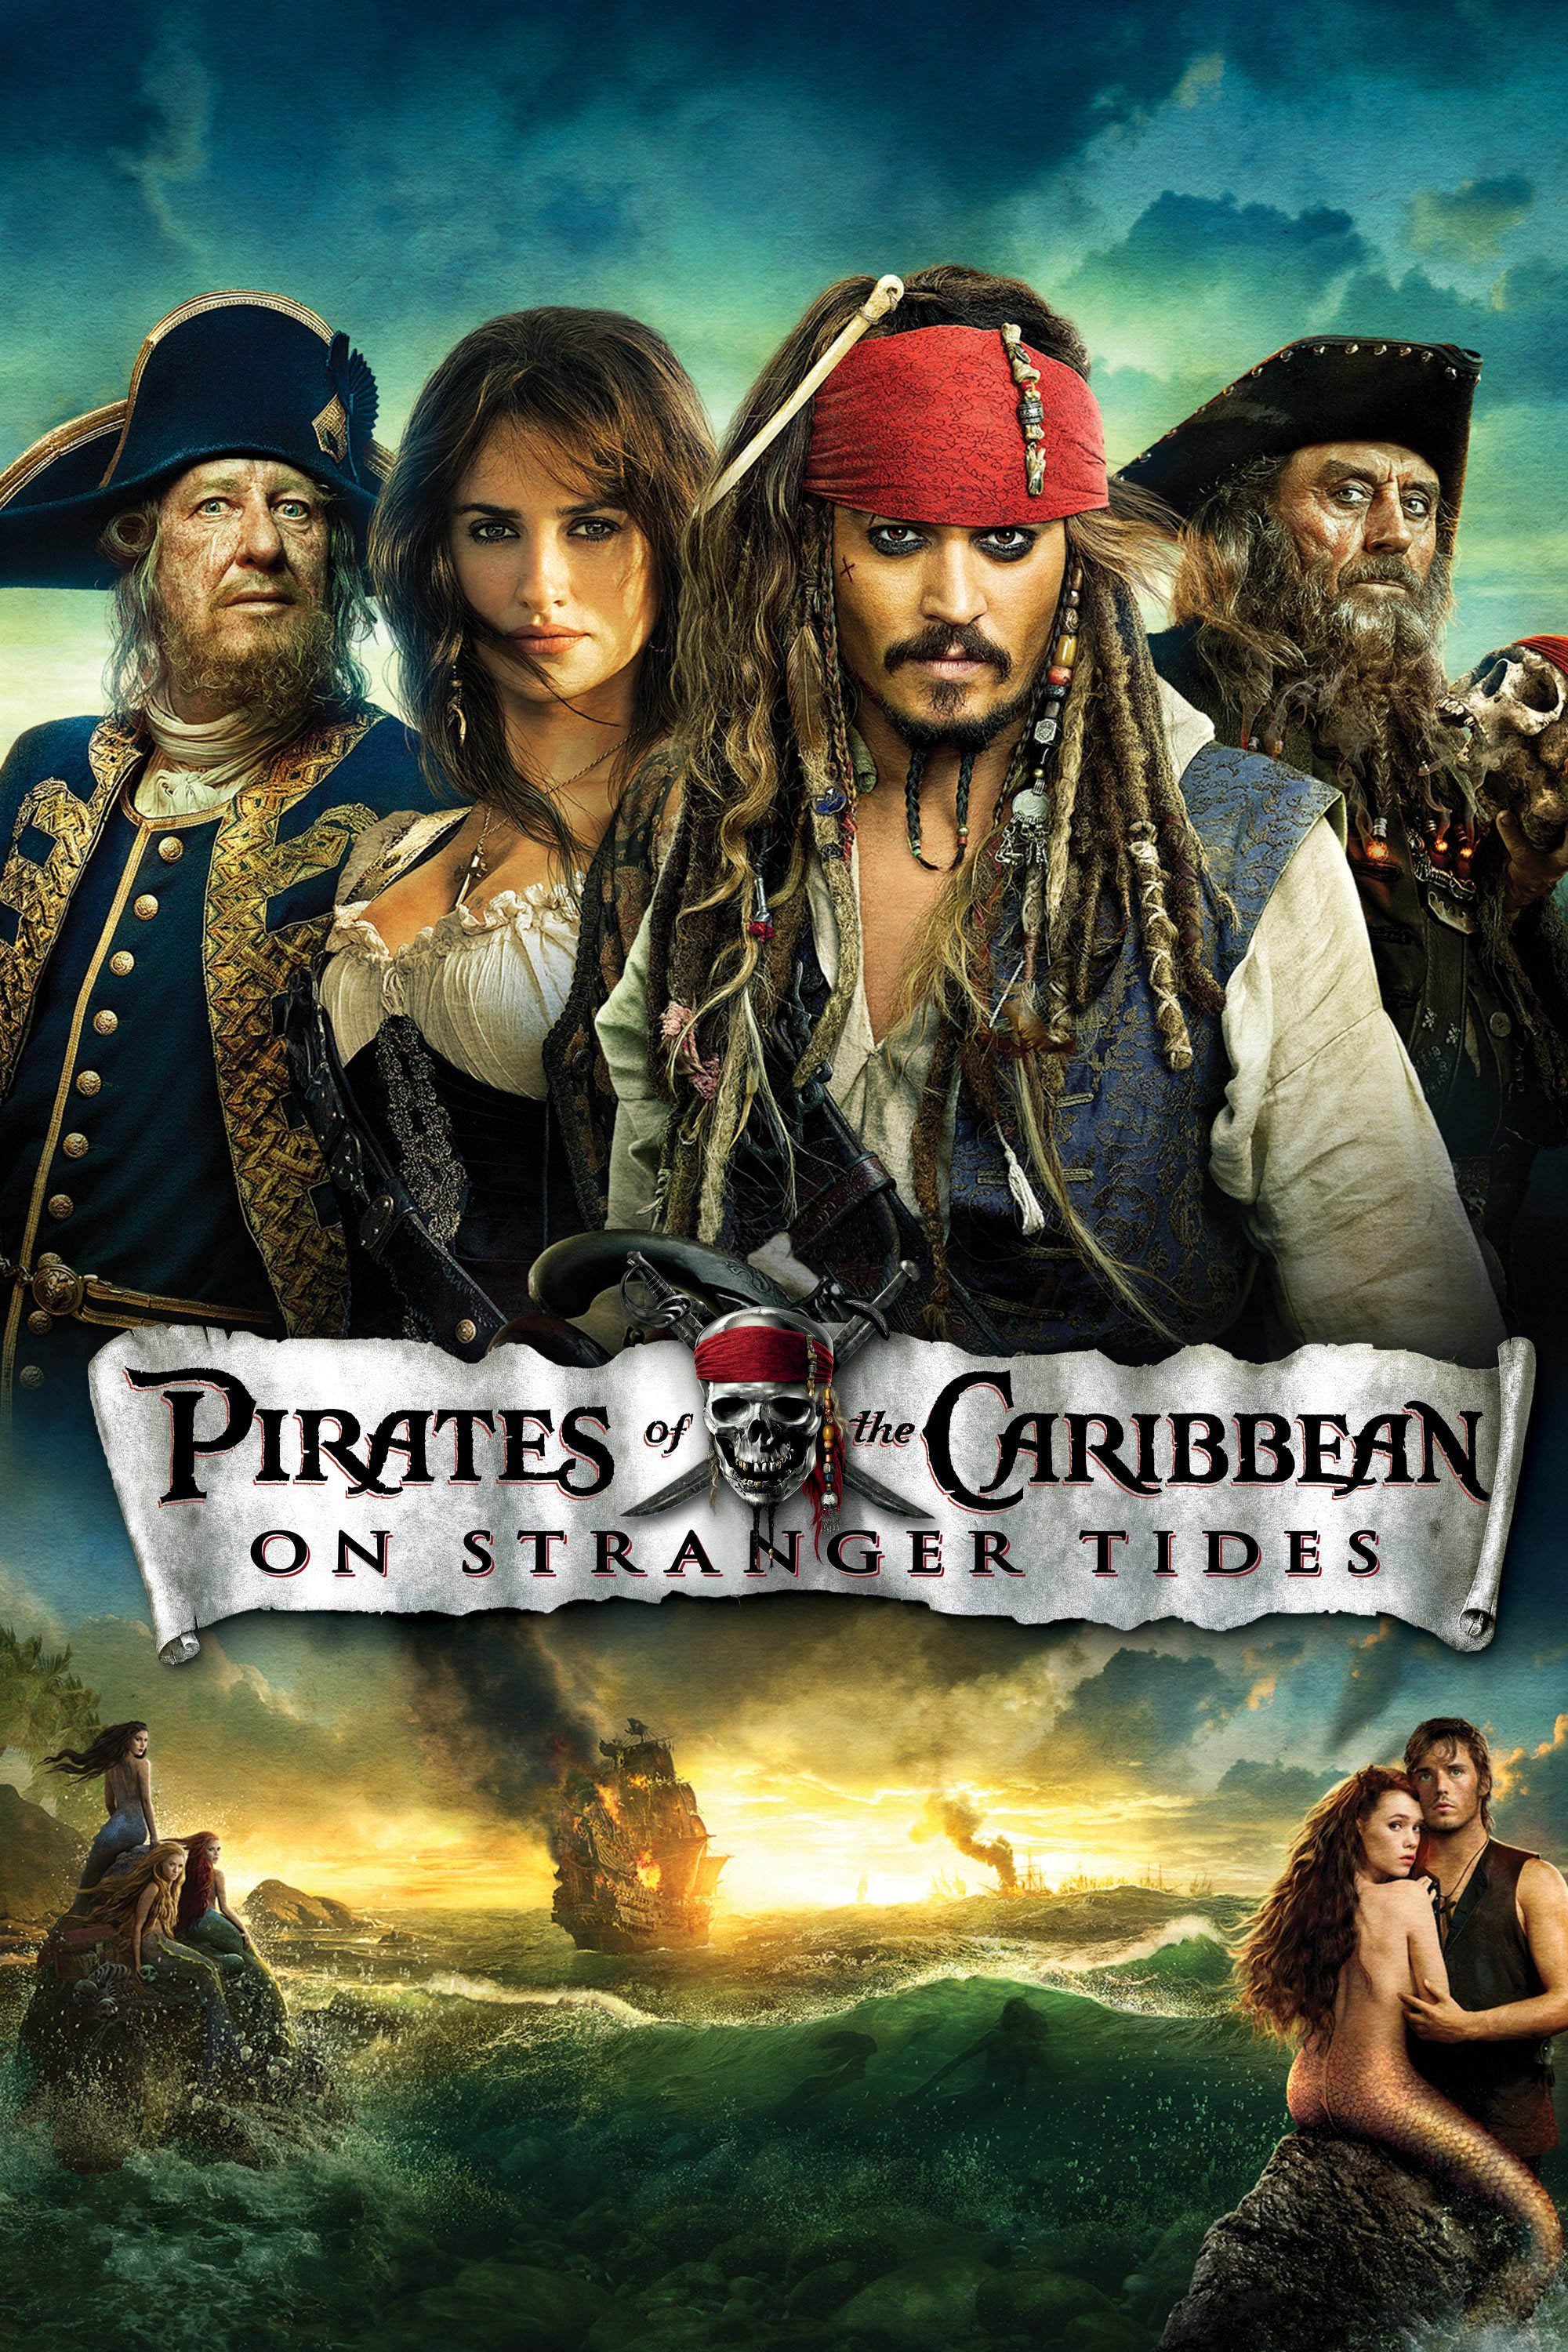 Pirates of the Caribbean: On Stranger Tides Movie Poster - ID: 147070